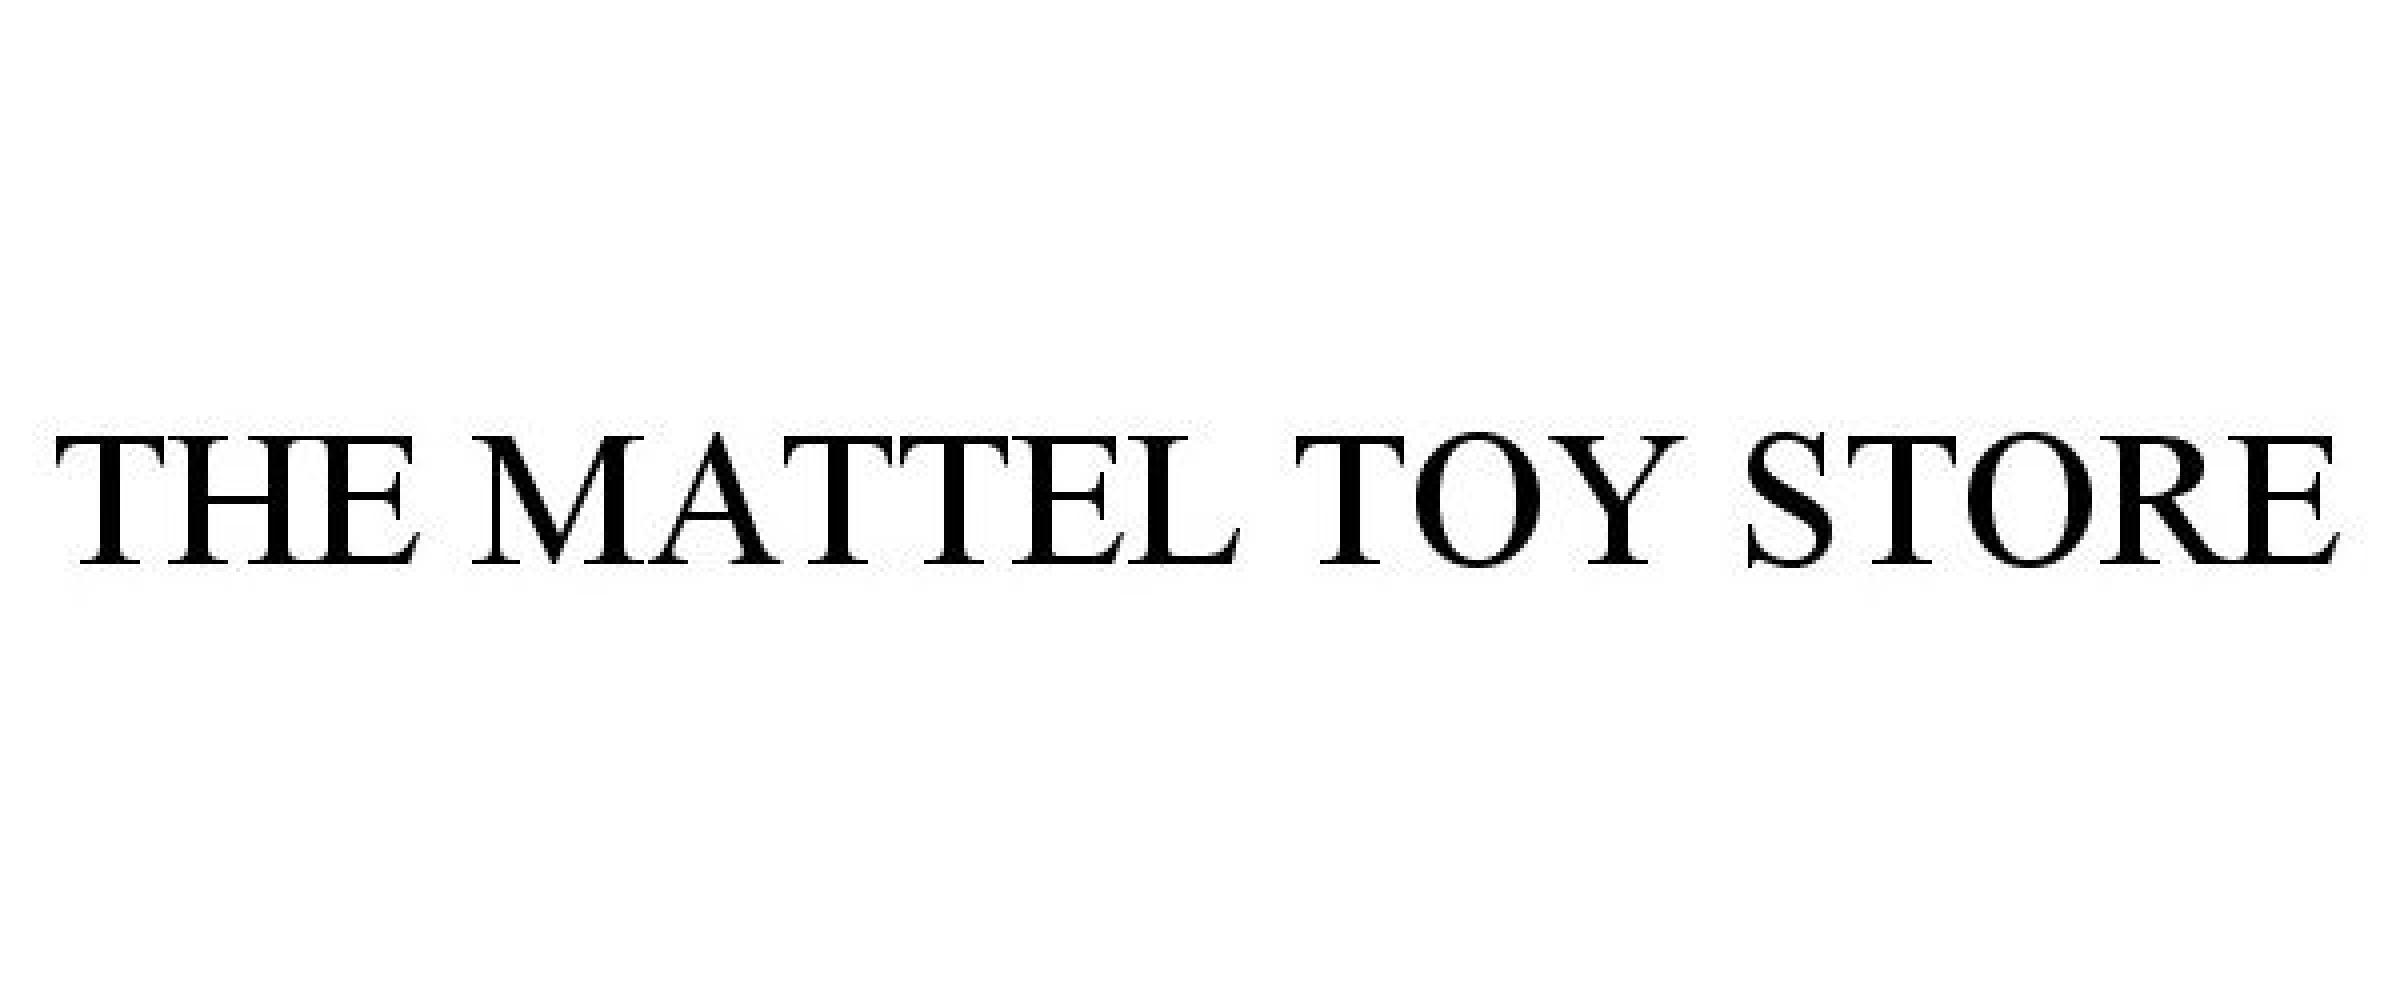  THE MATTEL TOY STORE